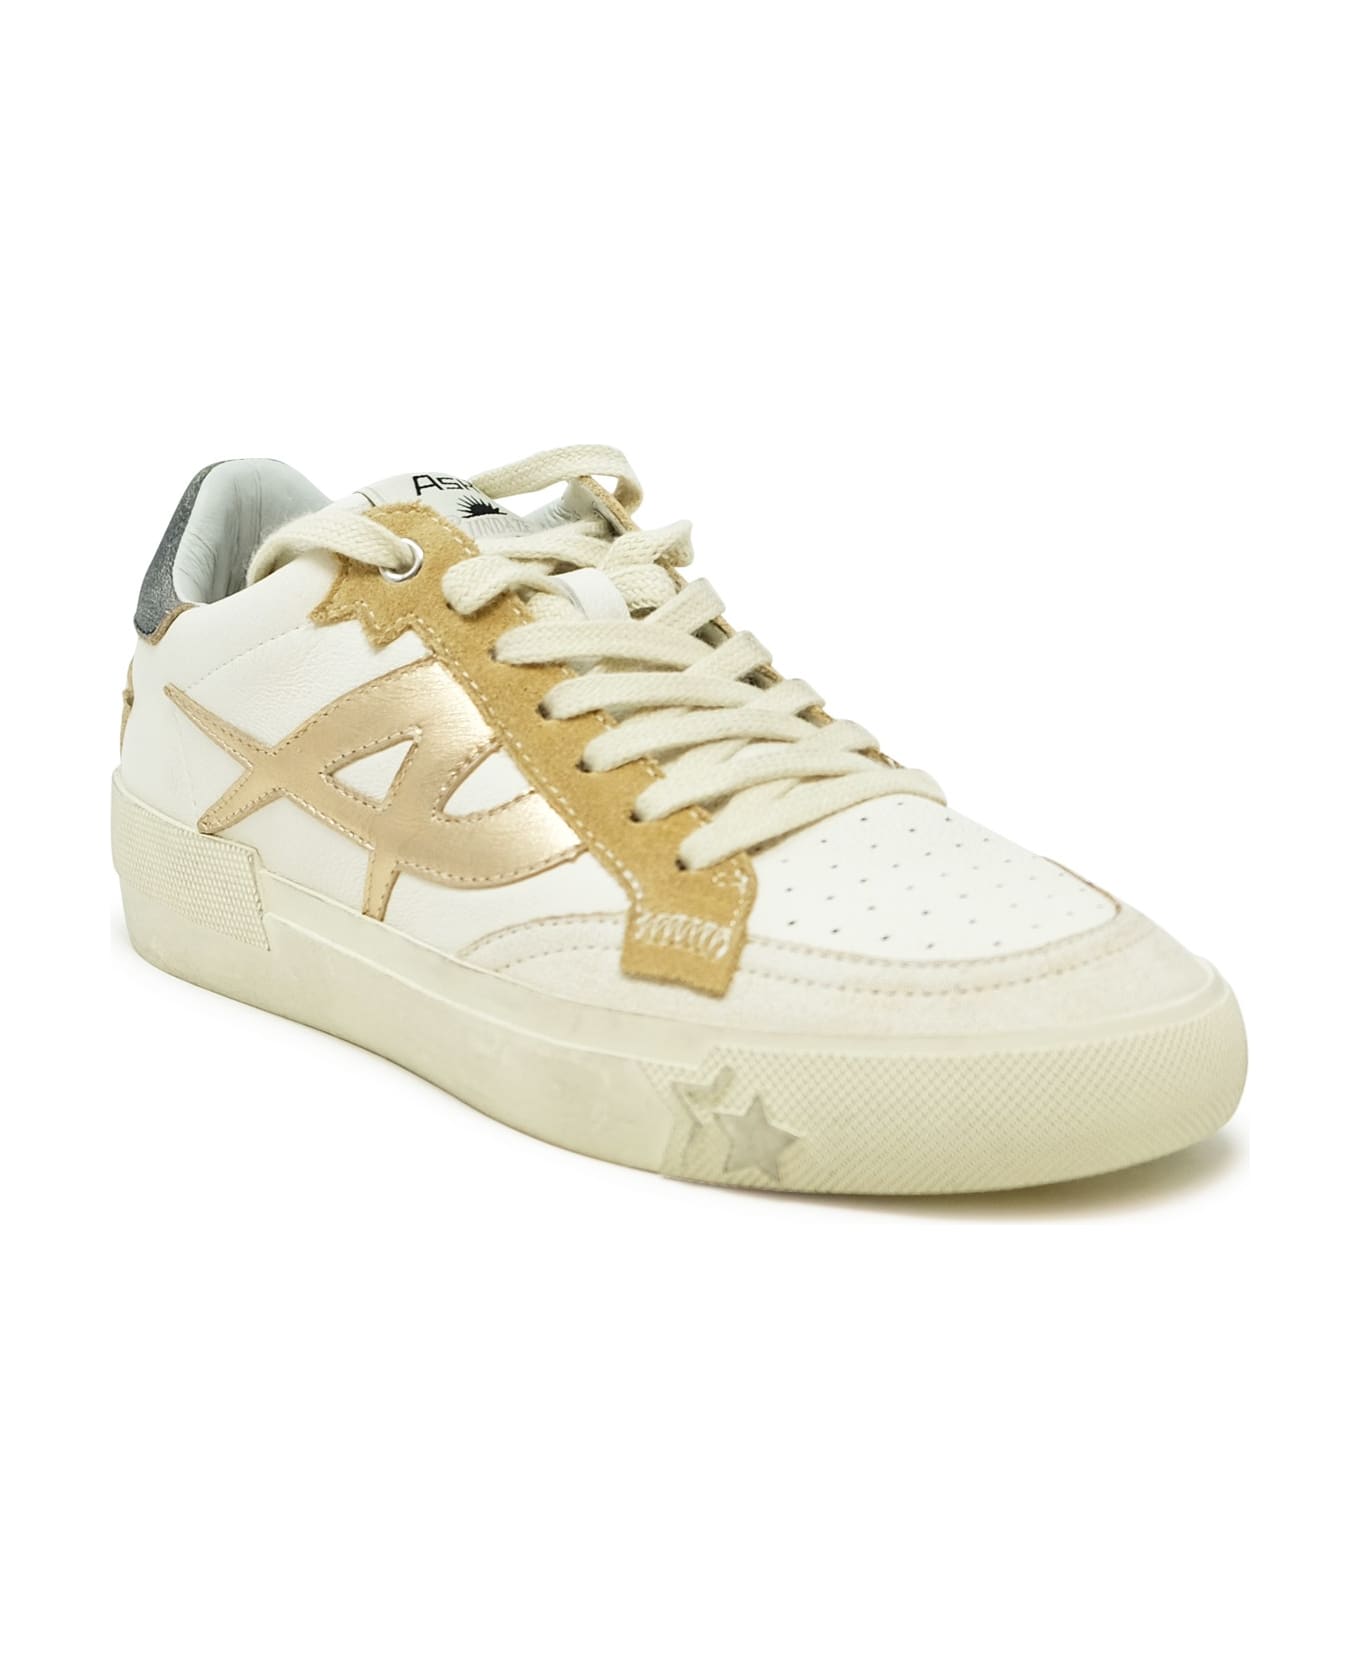 Ash Beige/white Leather Sneakers - WHITE/BEIGE